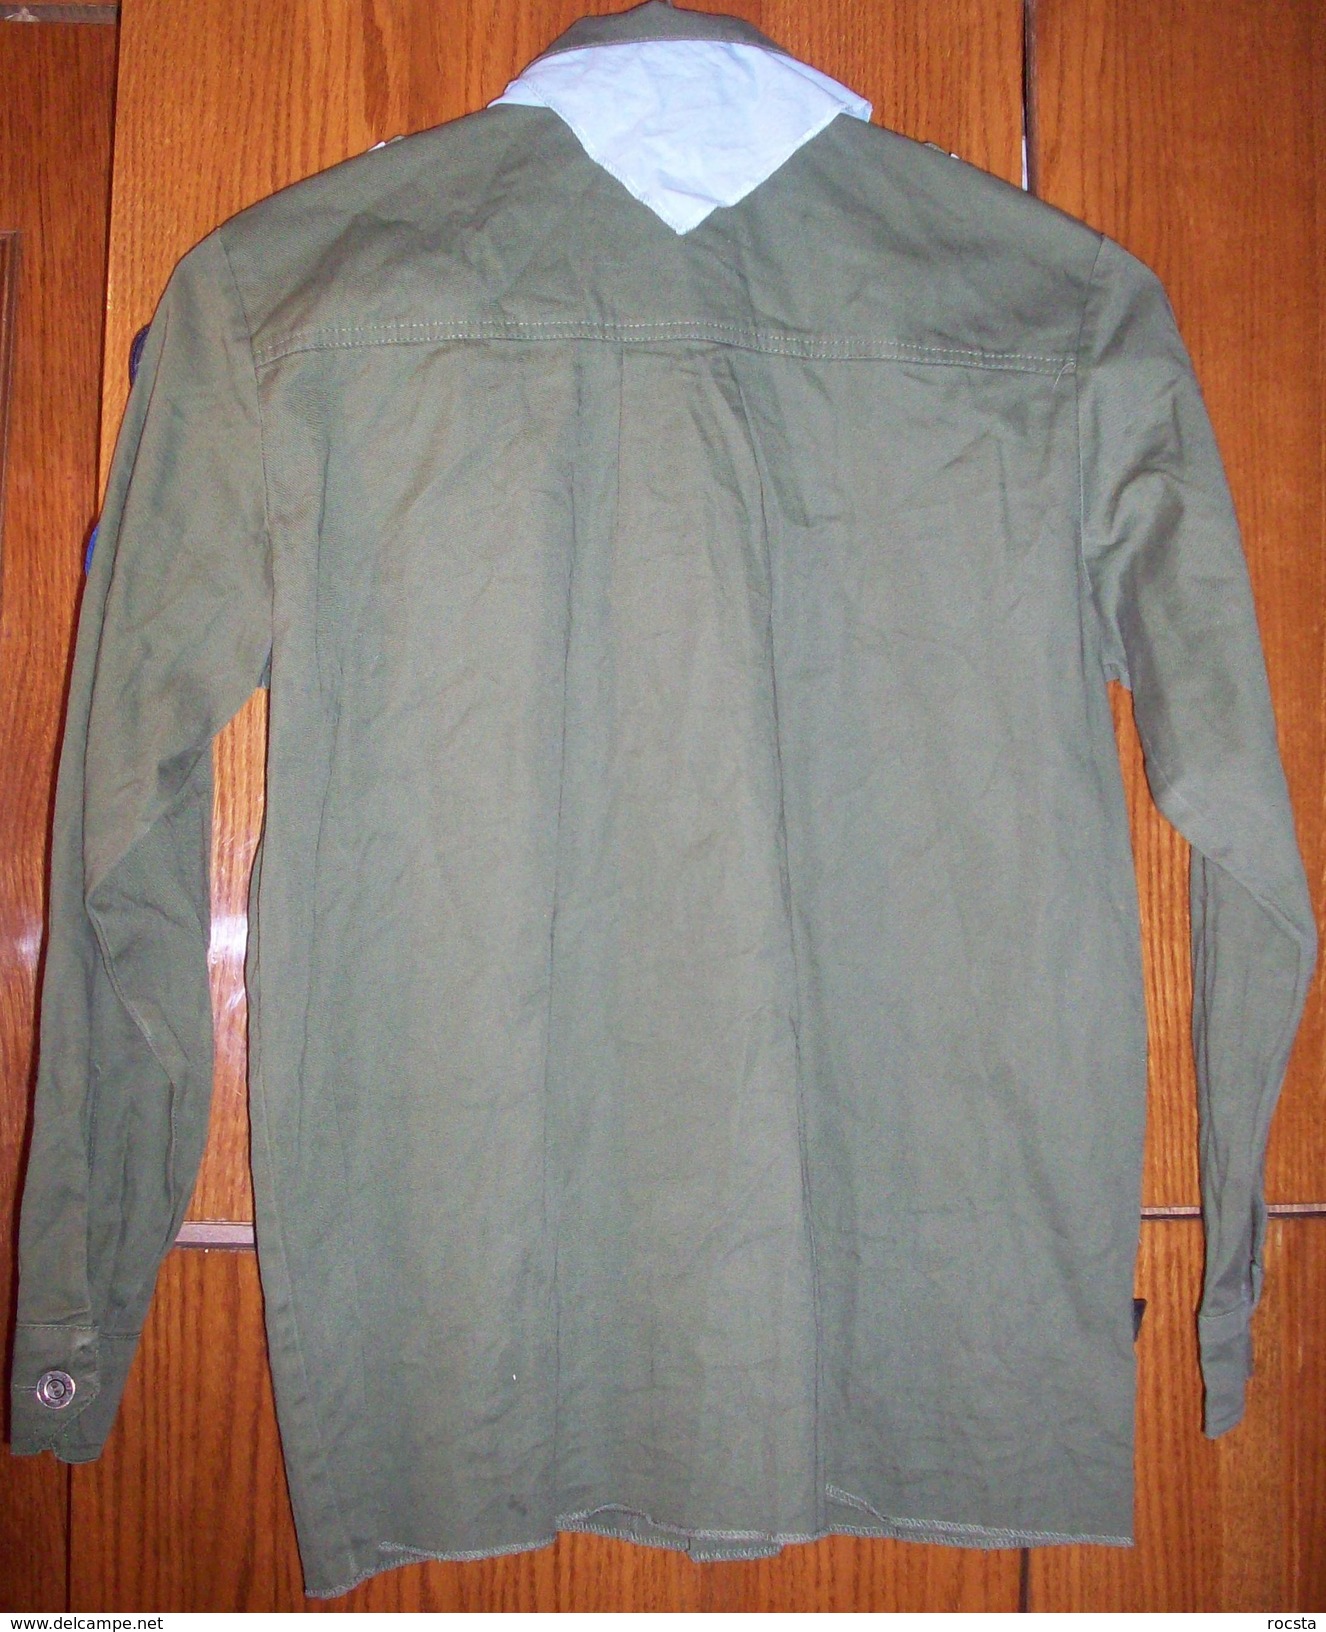 Poland scout ZUCH olive shirt - with patches, badges, ranks, epaulets & tie